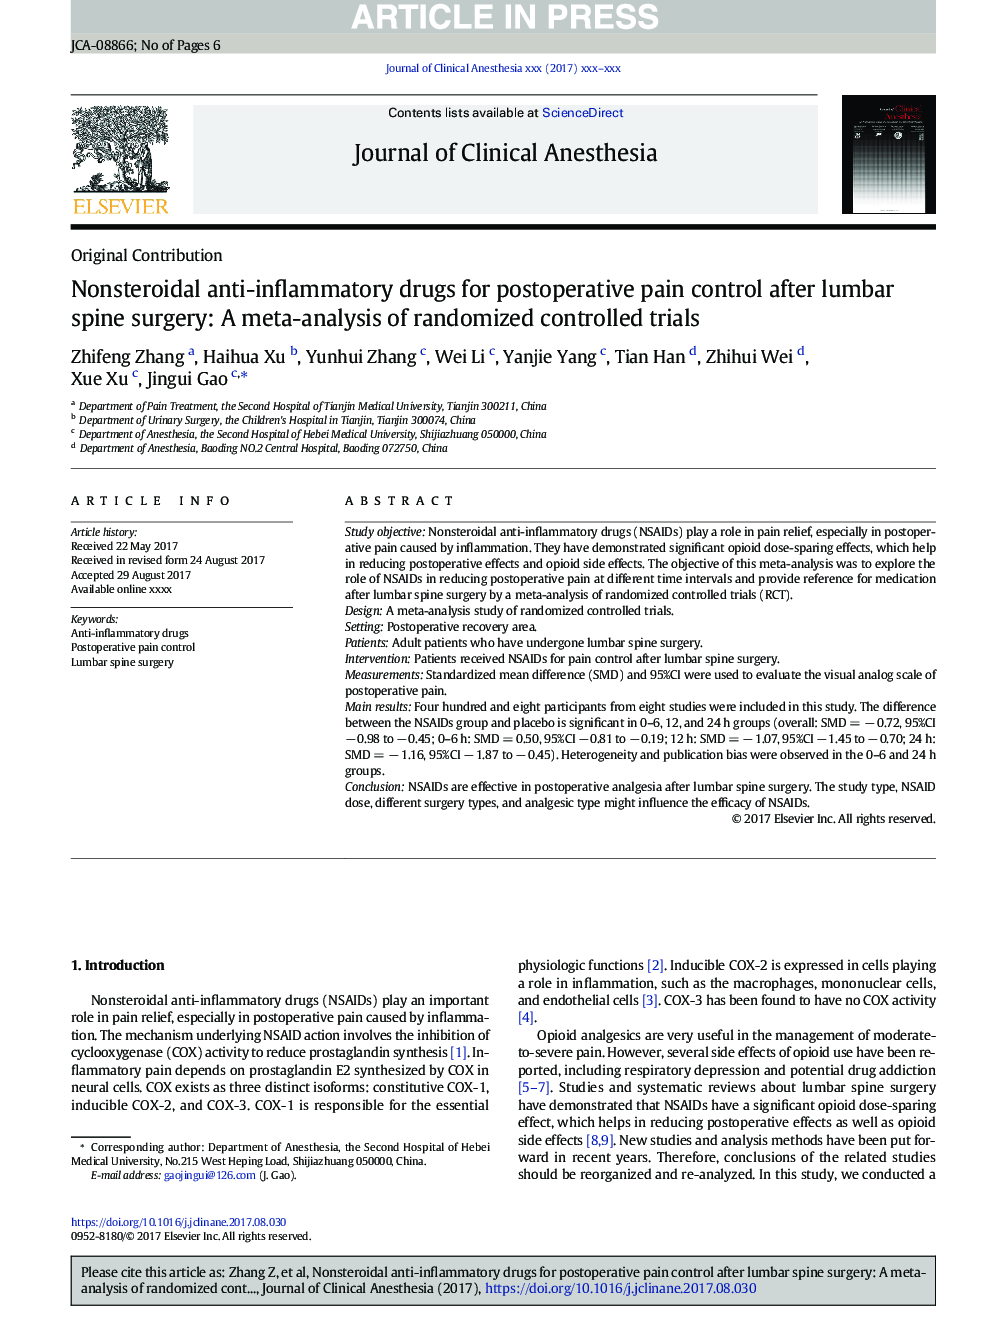 Nonsteroidal anti-inflammatory drugs for postoperative pain control after lumbar spine surgery: A meta-analysis of randomized controlled trials